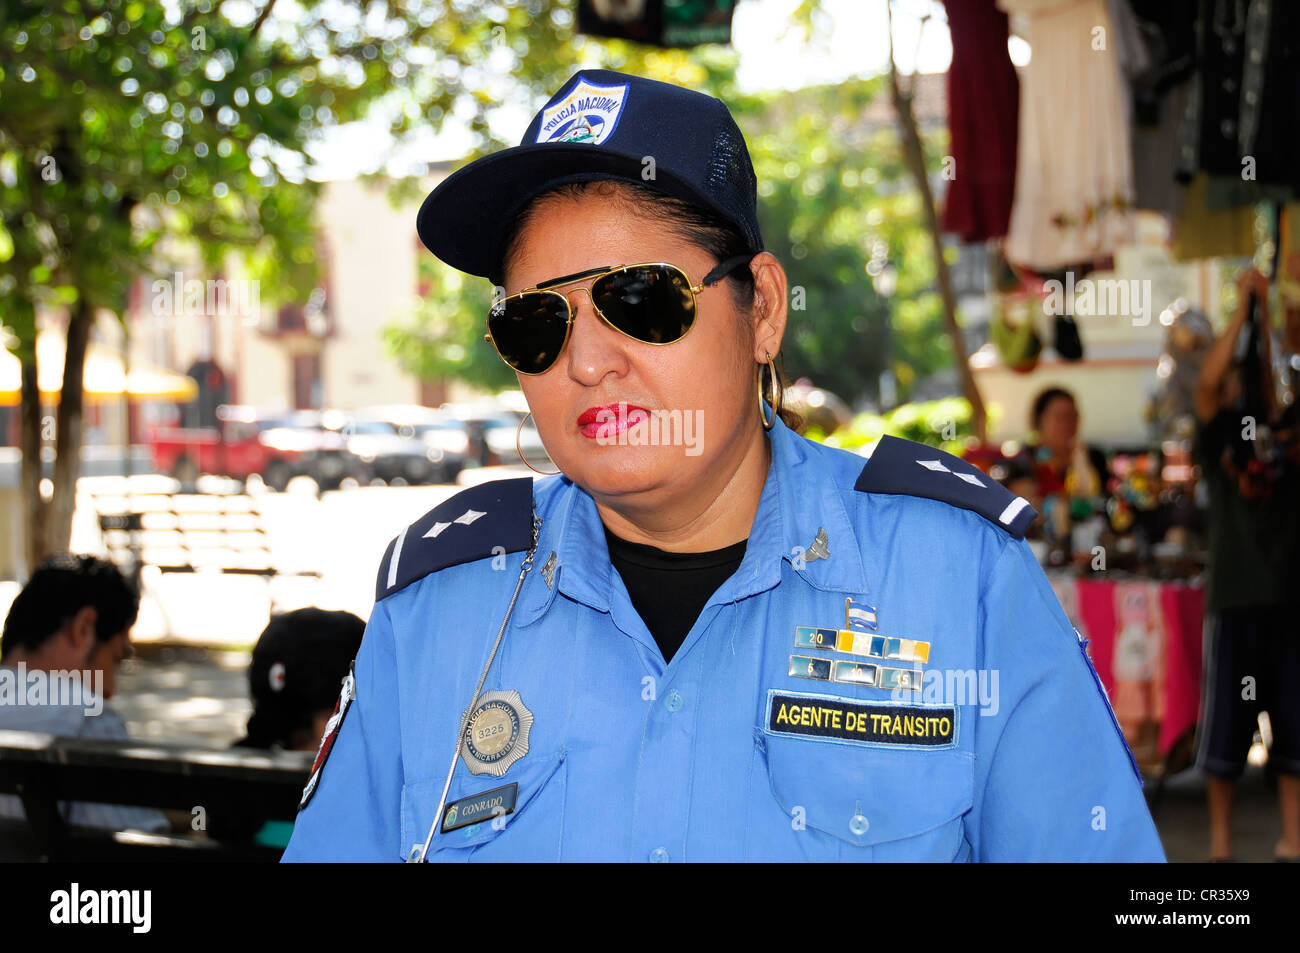 Female police officer, manager, Policia Nacional, traffic police, Leon, Nicaragua, Central America Stock Photo